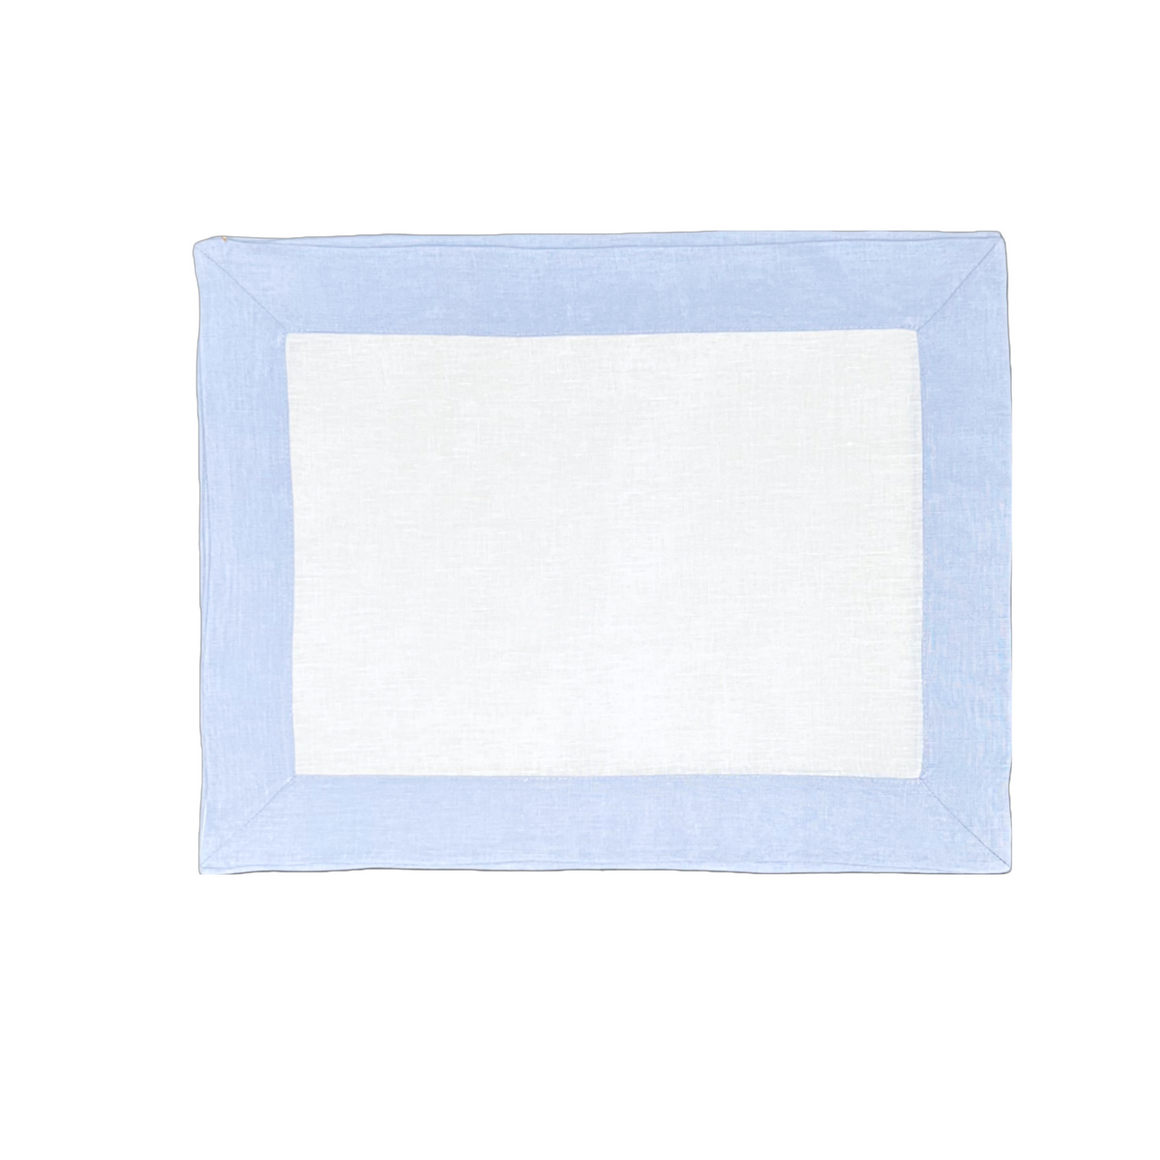 White Linen Placemat With Blue Border, Set of 4